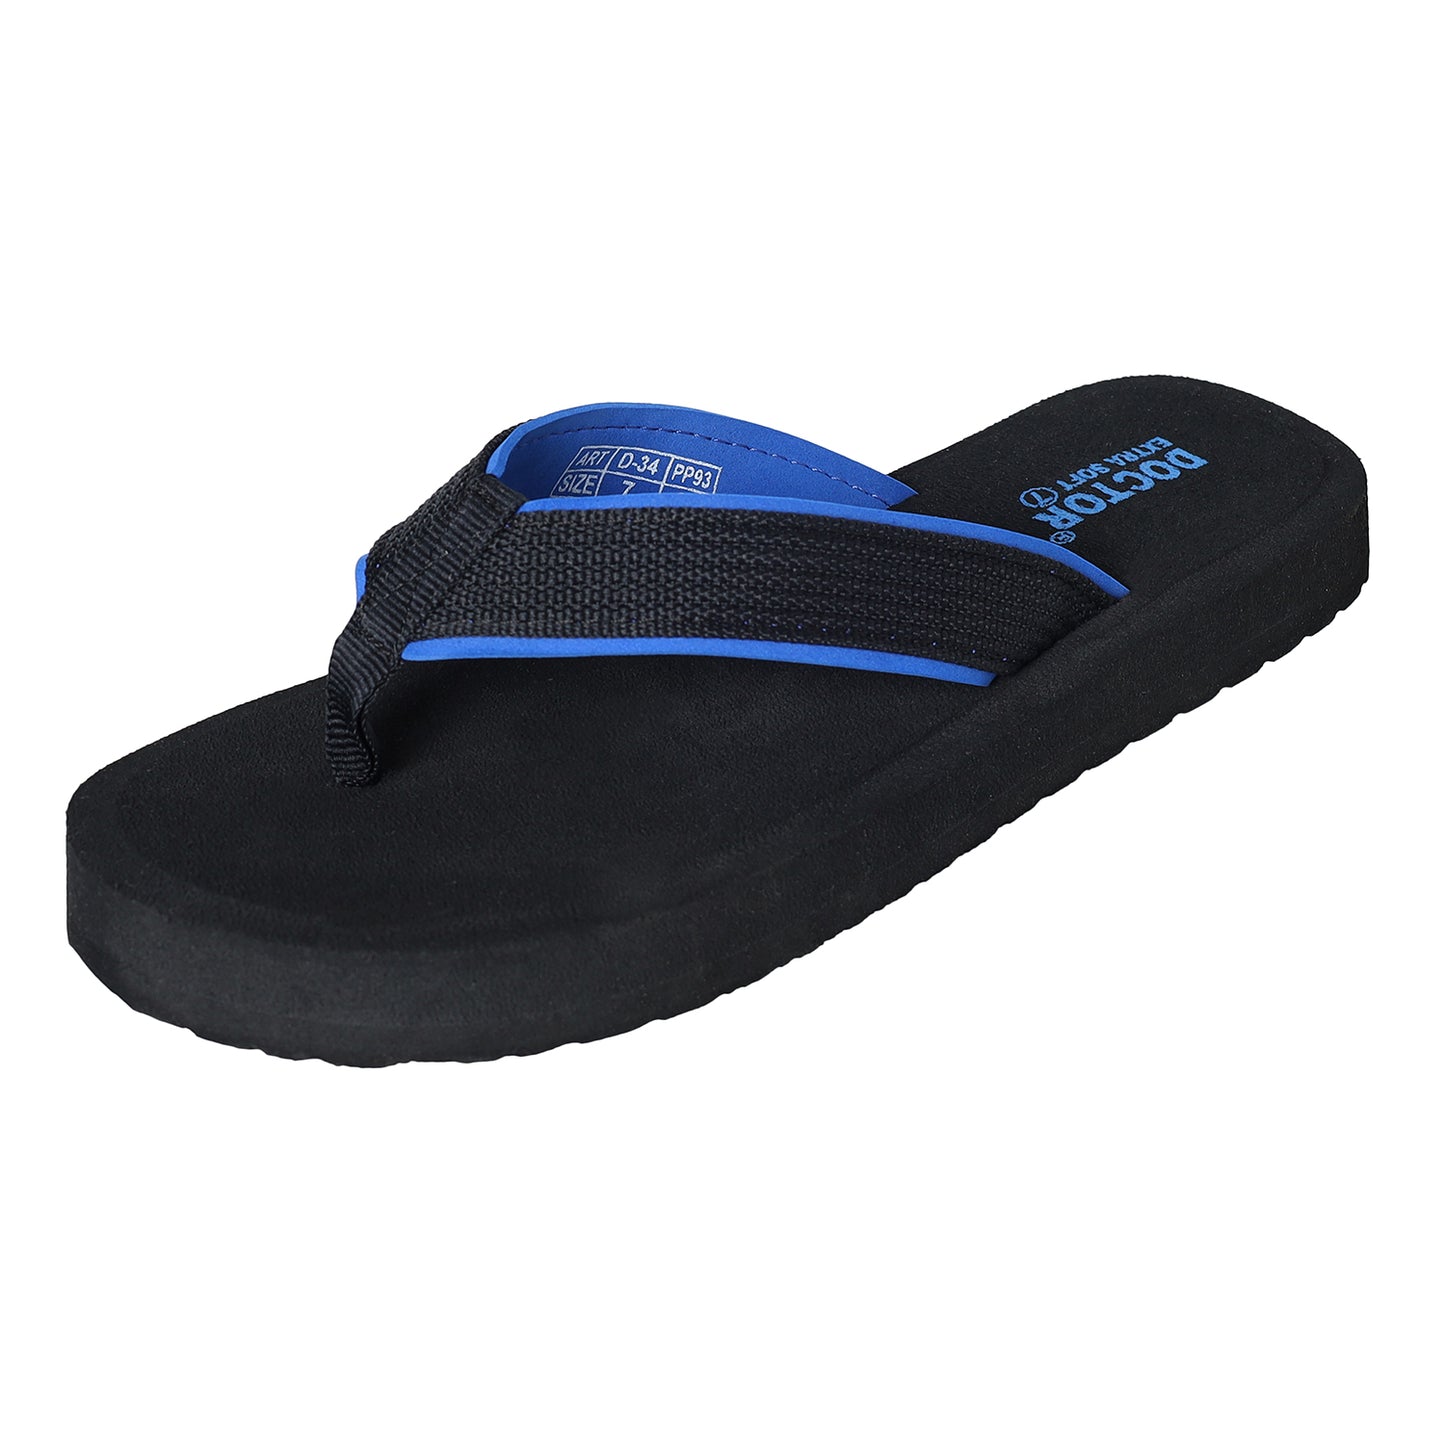 DOCTOR EXTRA SOFT D-34 Doctor Slippers for Men's Orthopedic Diabetic Non-Slip Lightweight Durable Cushion Comfortable Flat Mcr Casual Stylish Dr Chappals and House Flip flops For Gent's and Boys